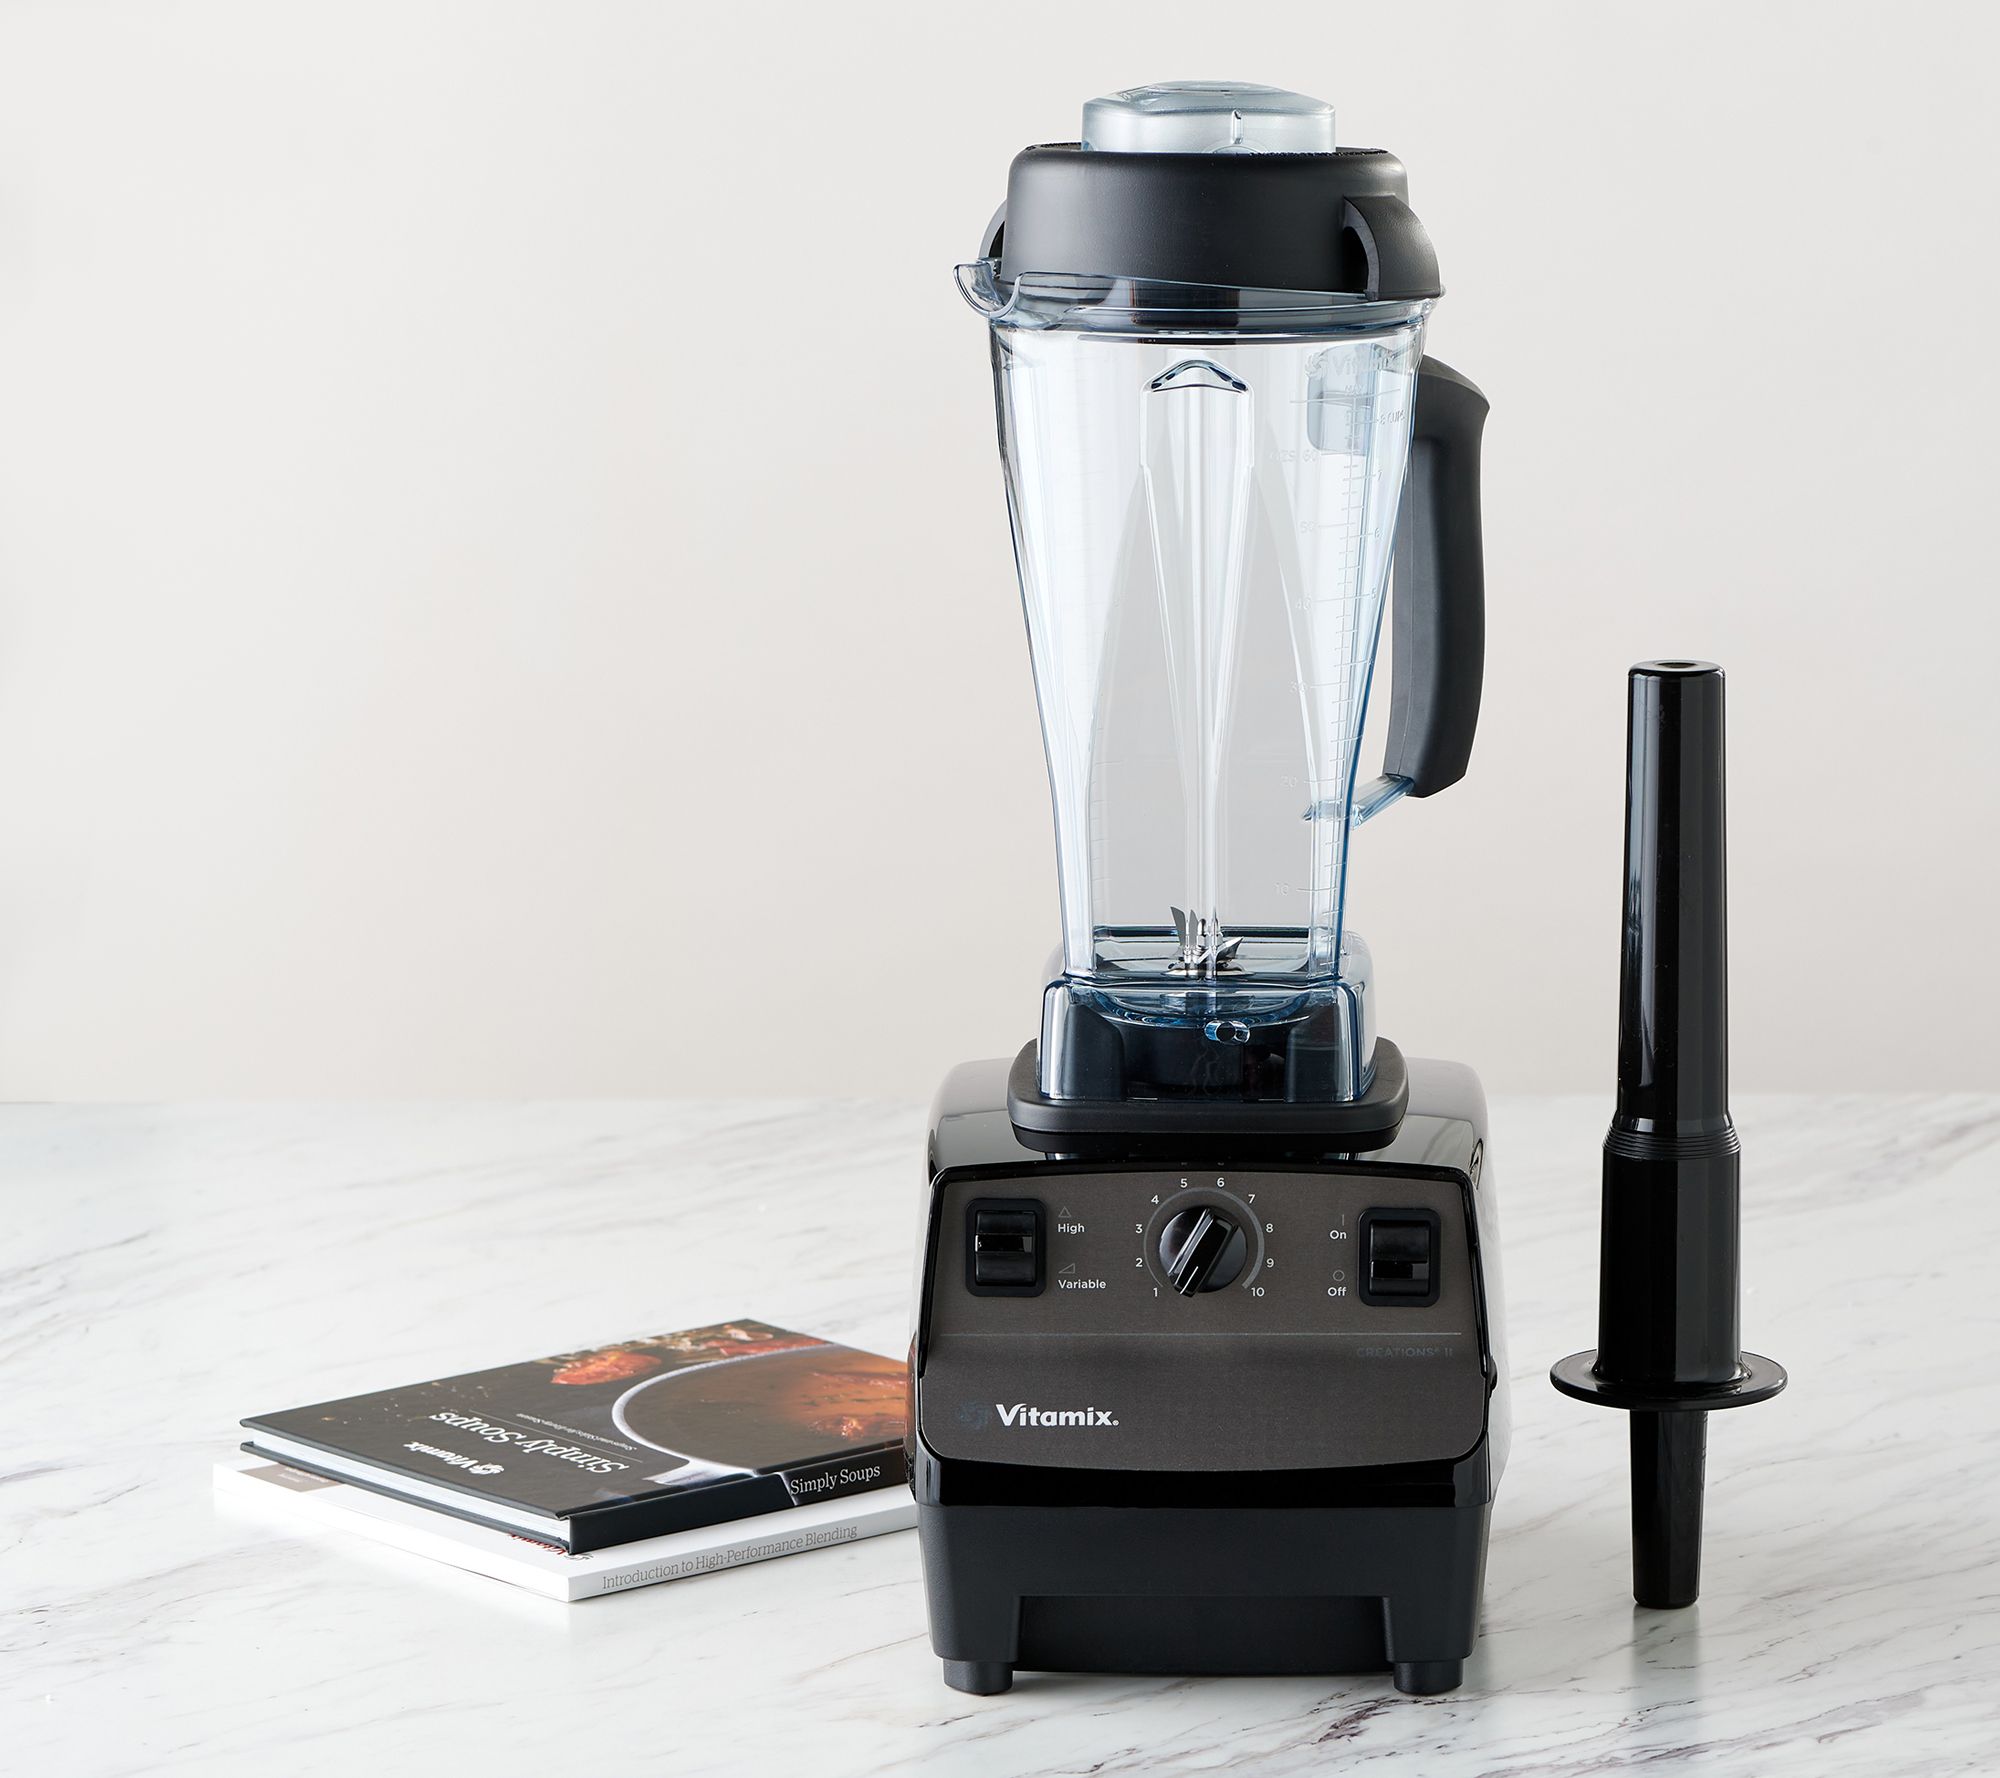 QVC's Don't-Miss Deals have Vitamix, humidifiers and more 